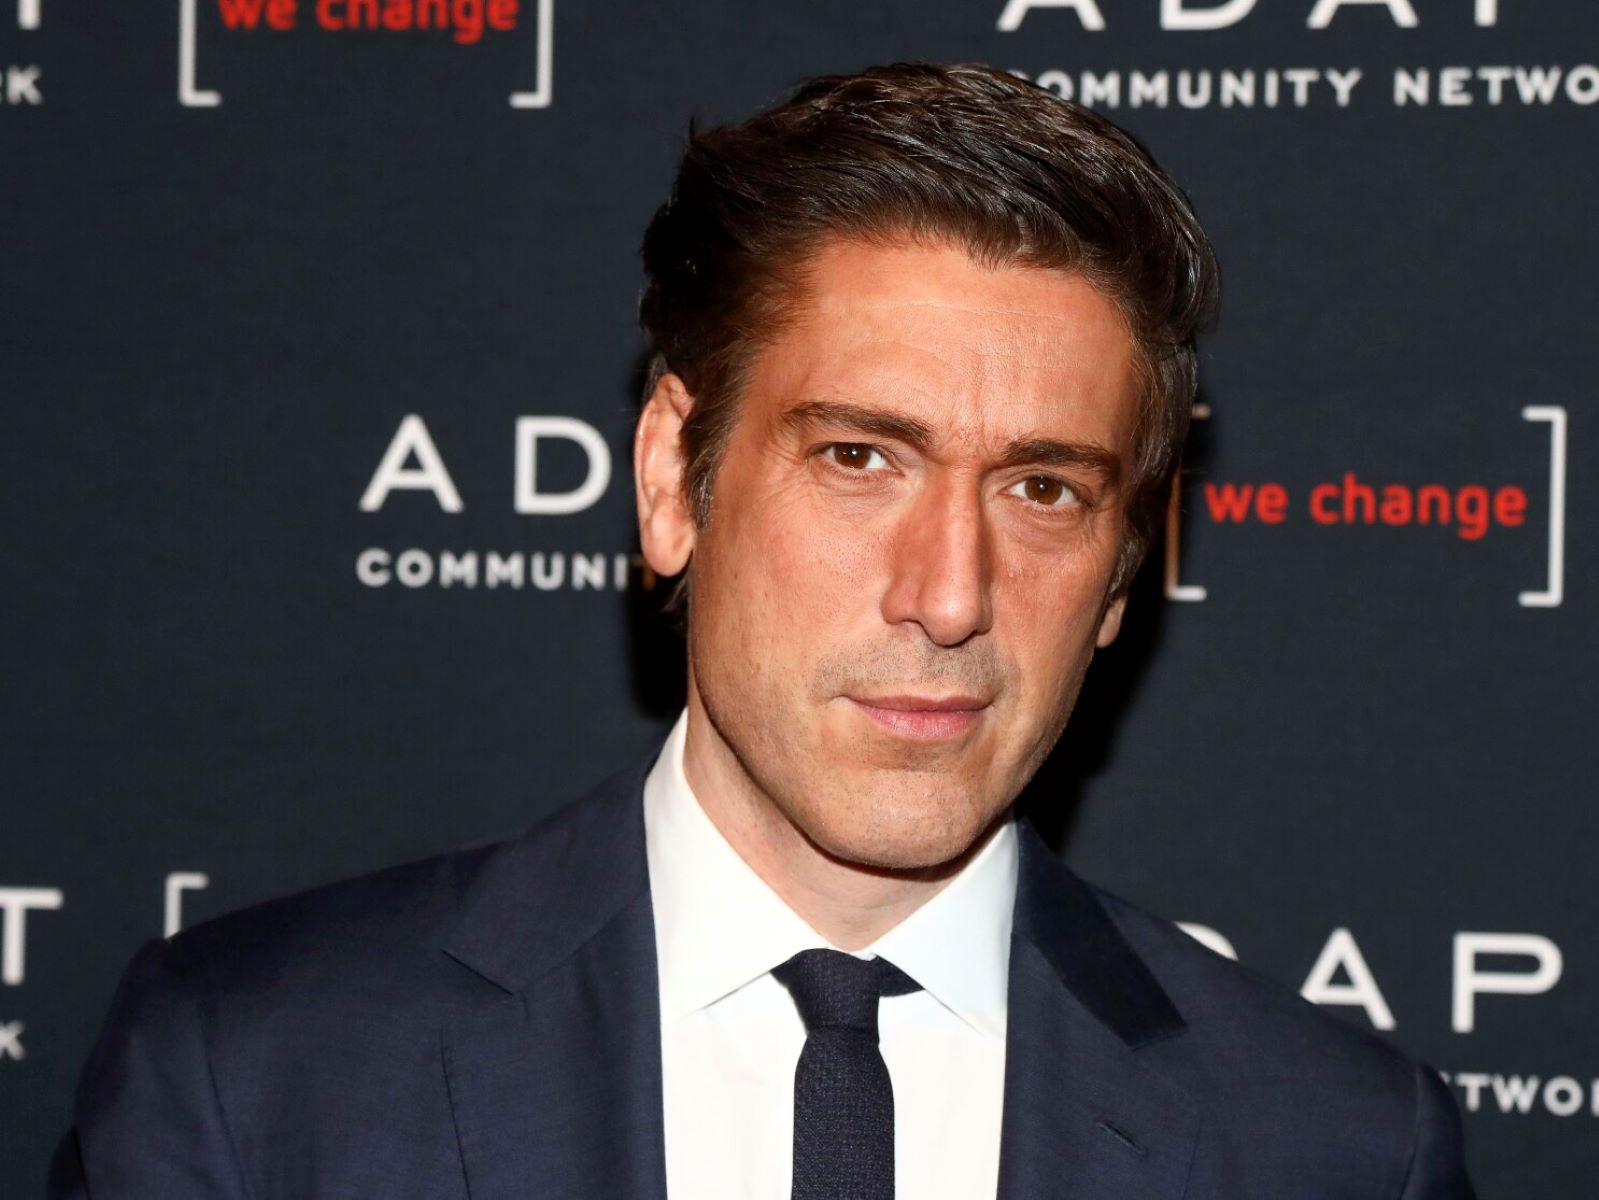 The Surprising Truth About ABC News Anchor David Muir’s Marriage